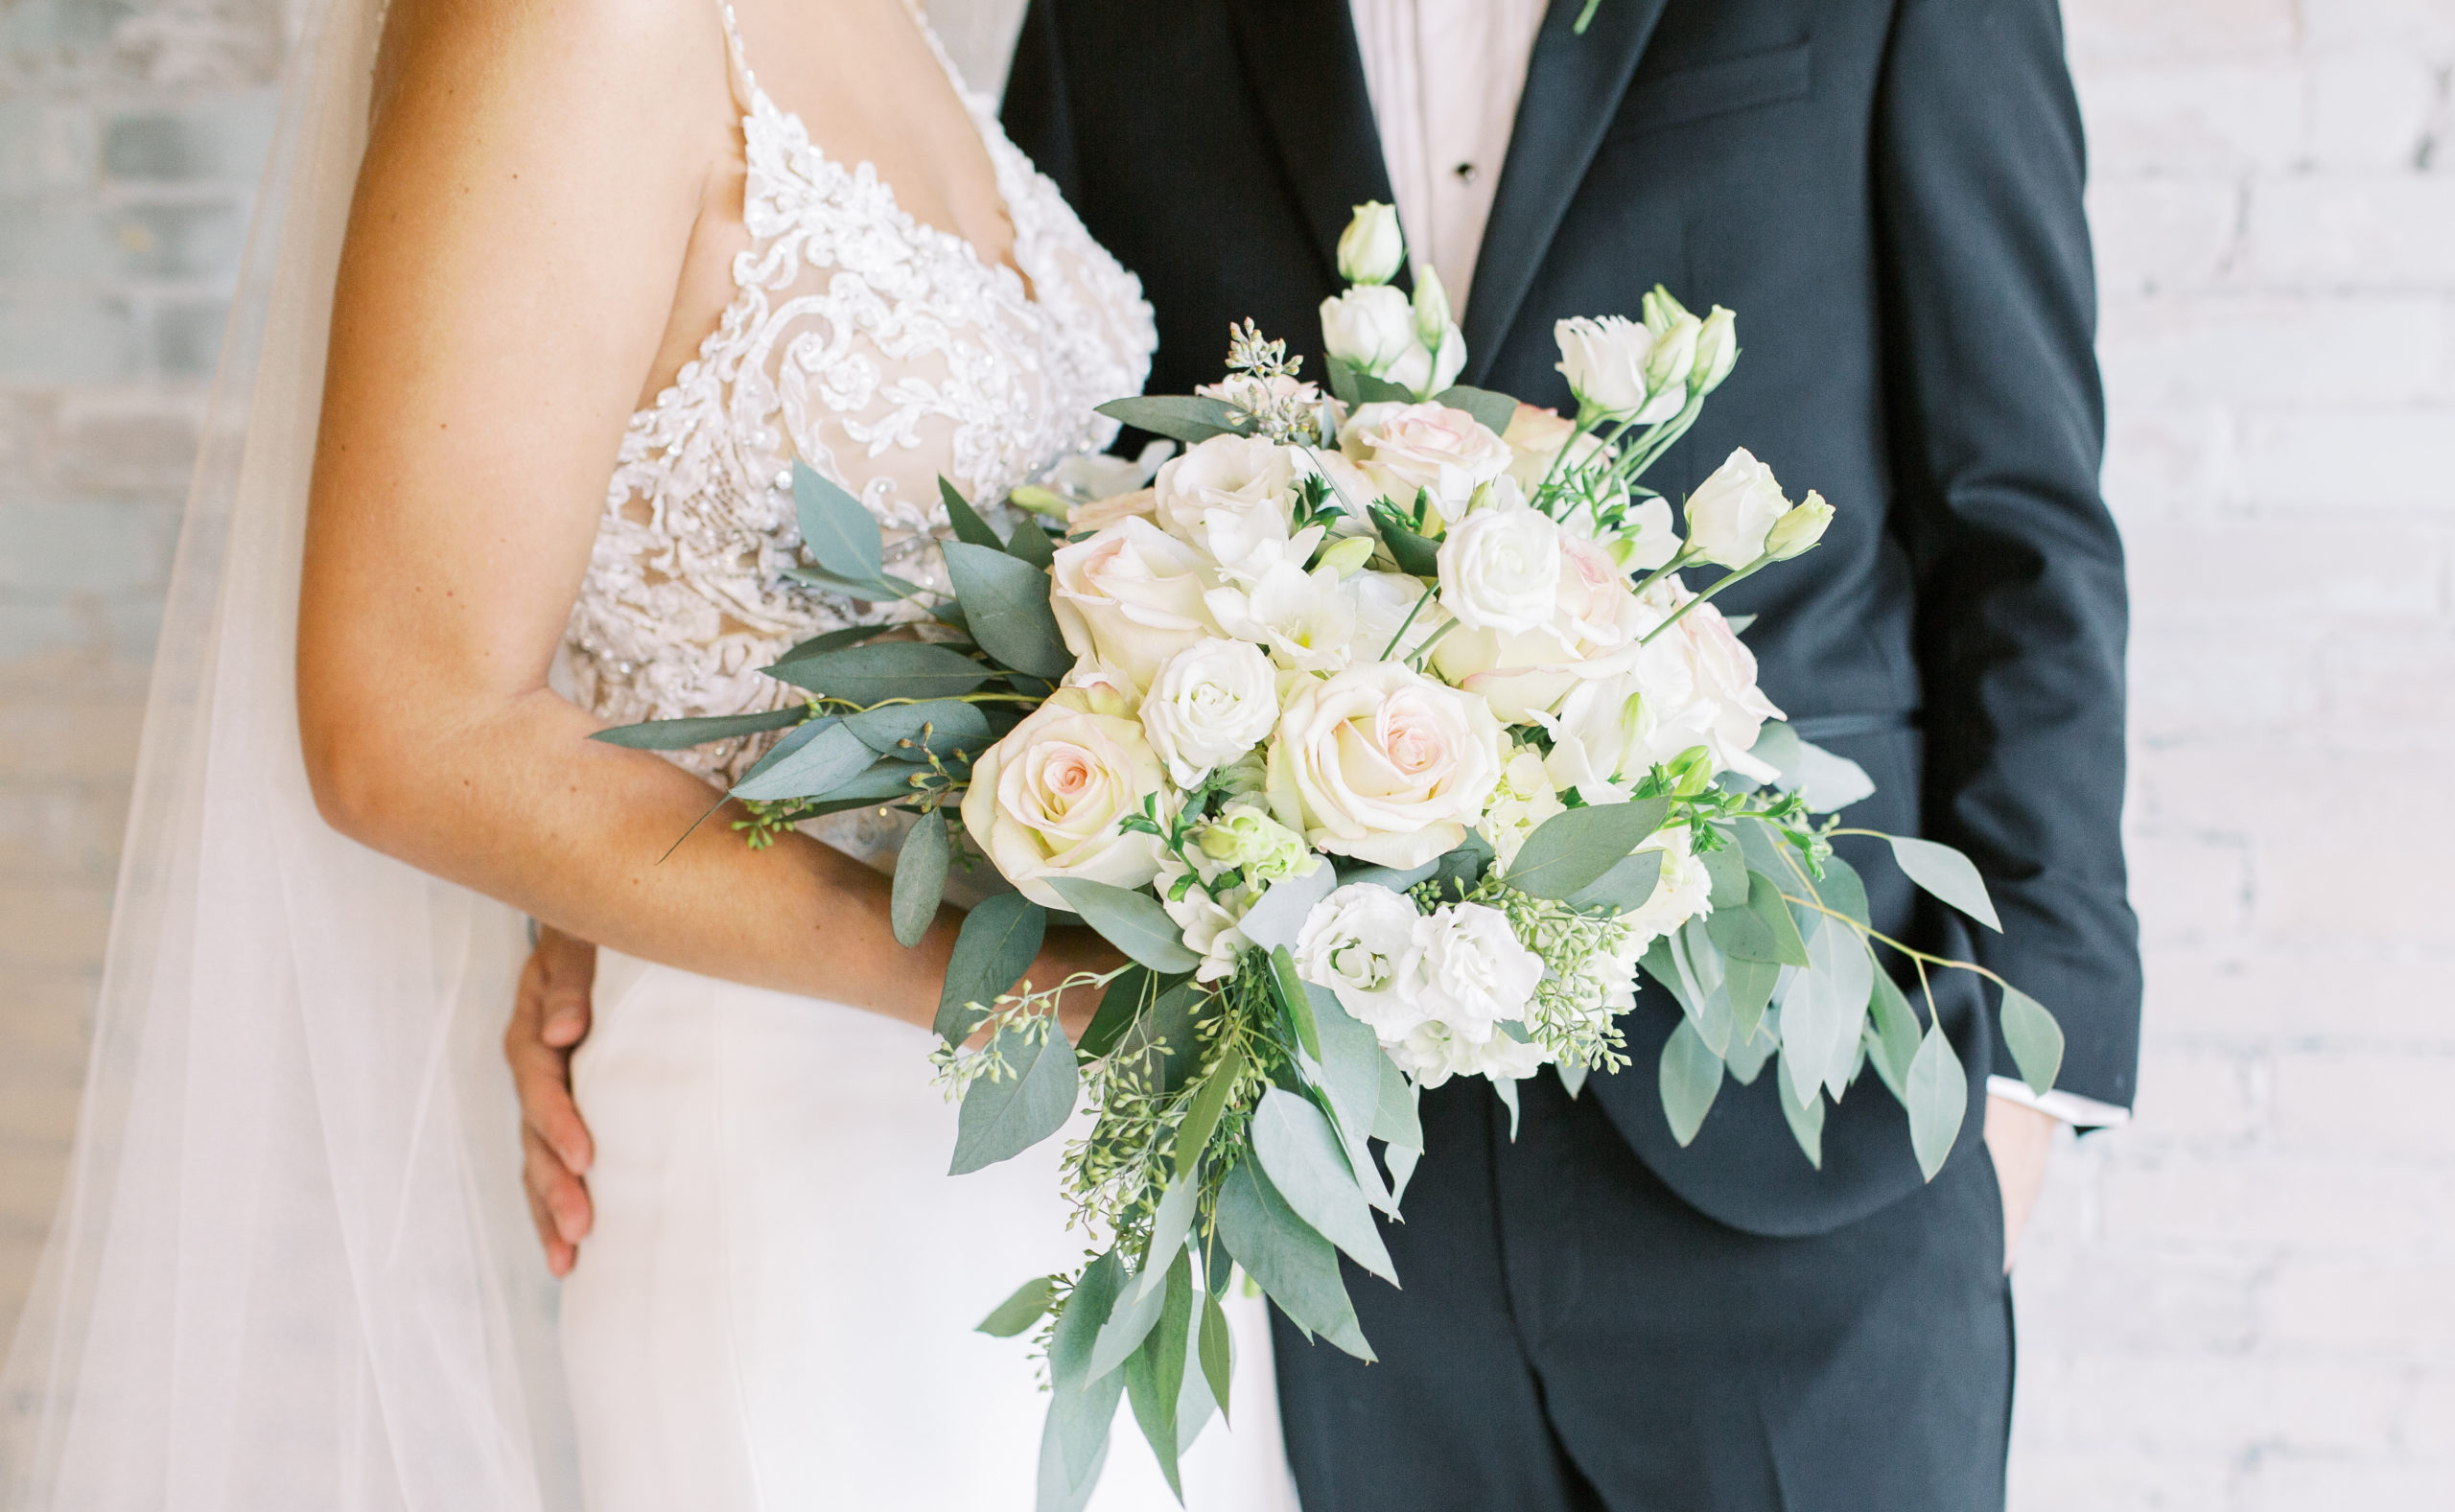 White and Light Pink Bridal Bouquet from Stems LLC